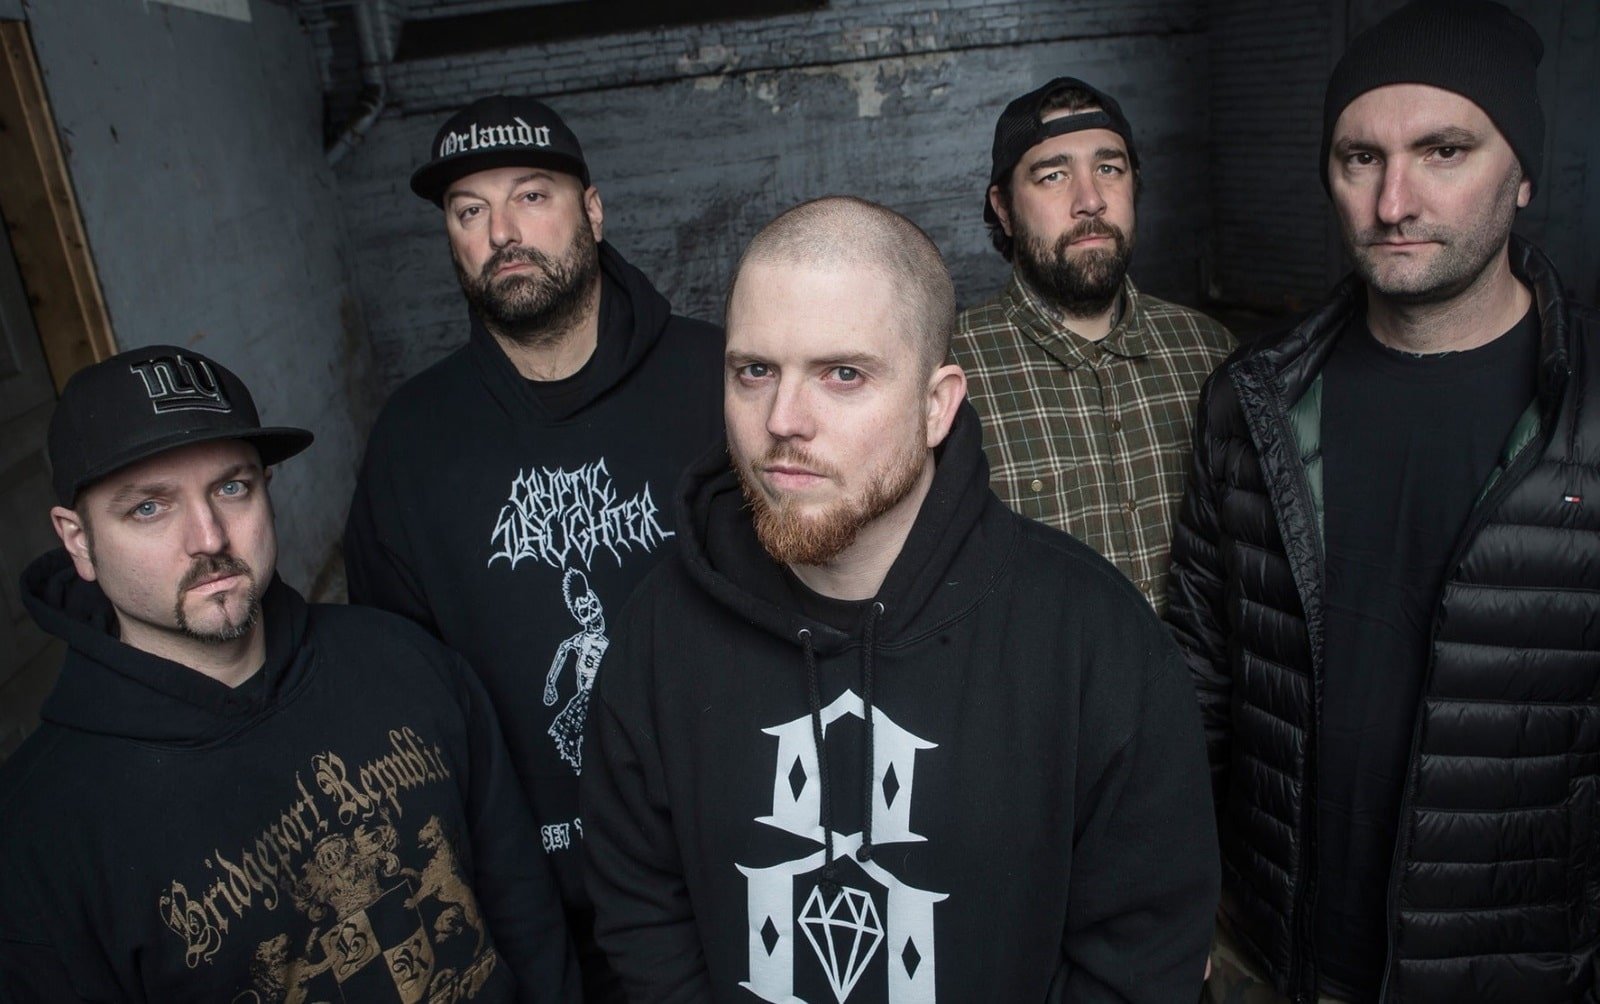 Read more about the article HATEBREED Release New Single “When The Blade Drops”!